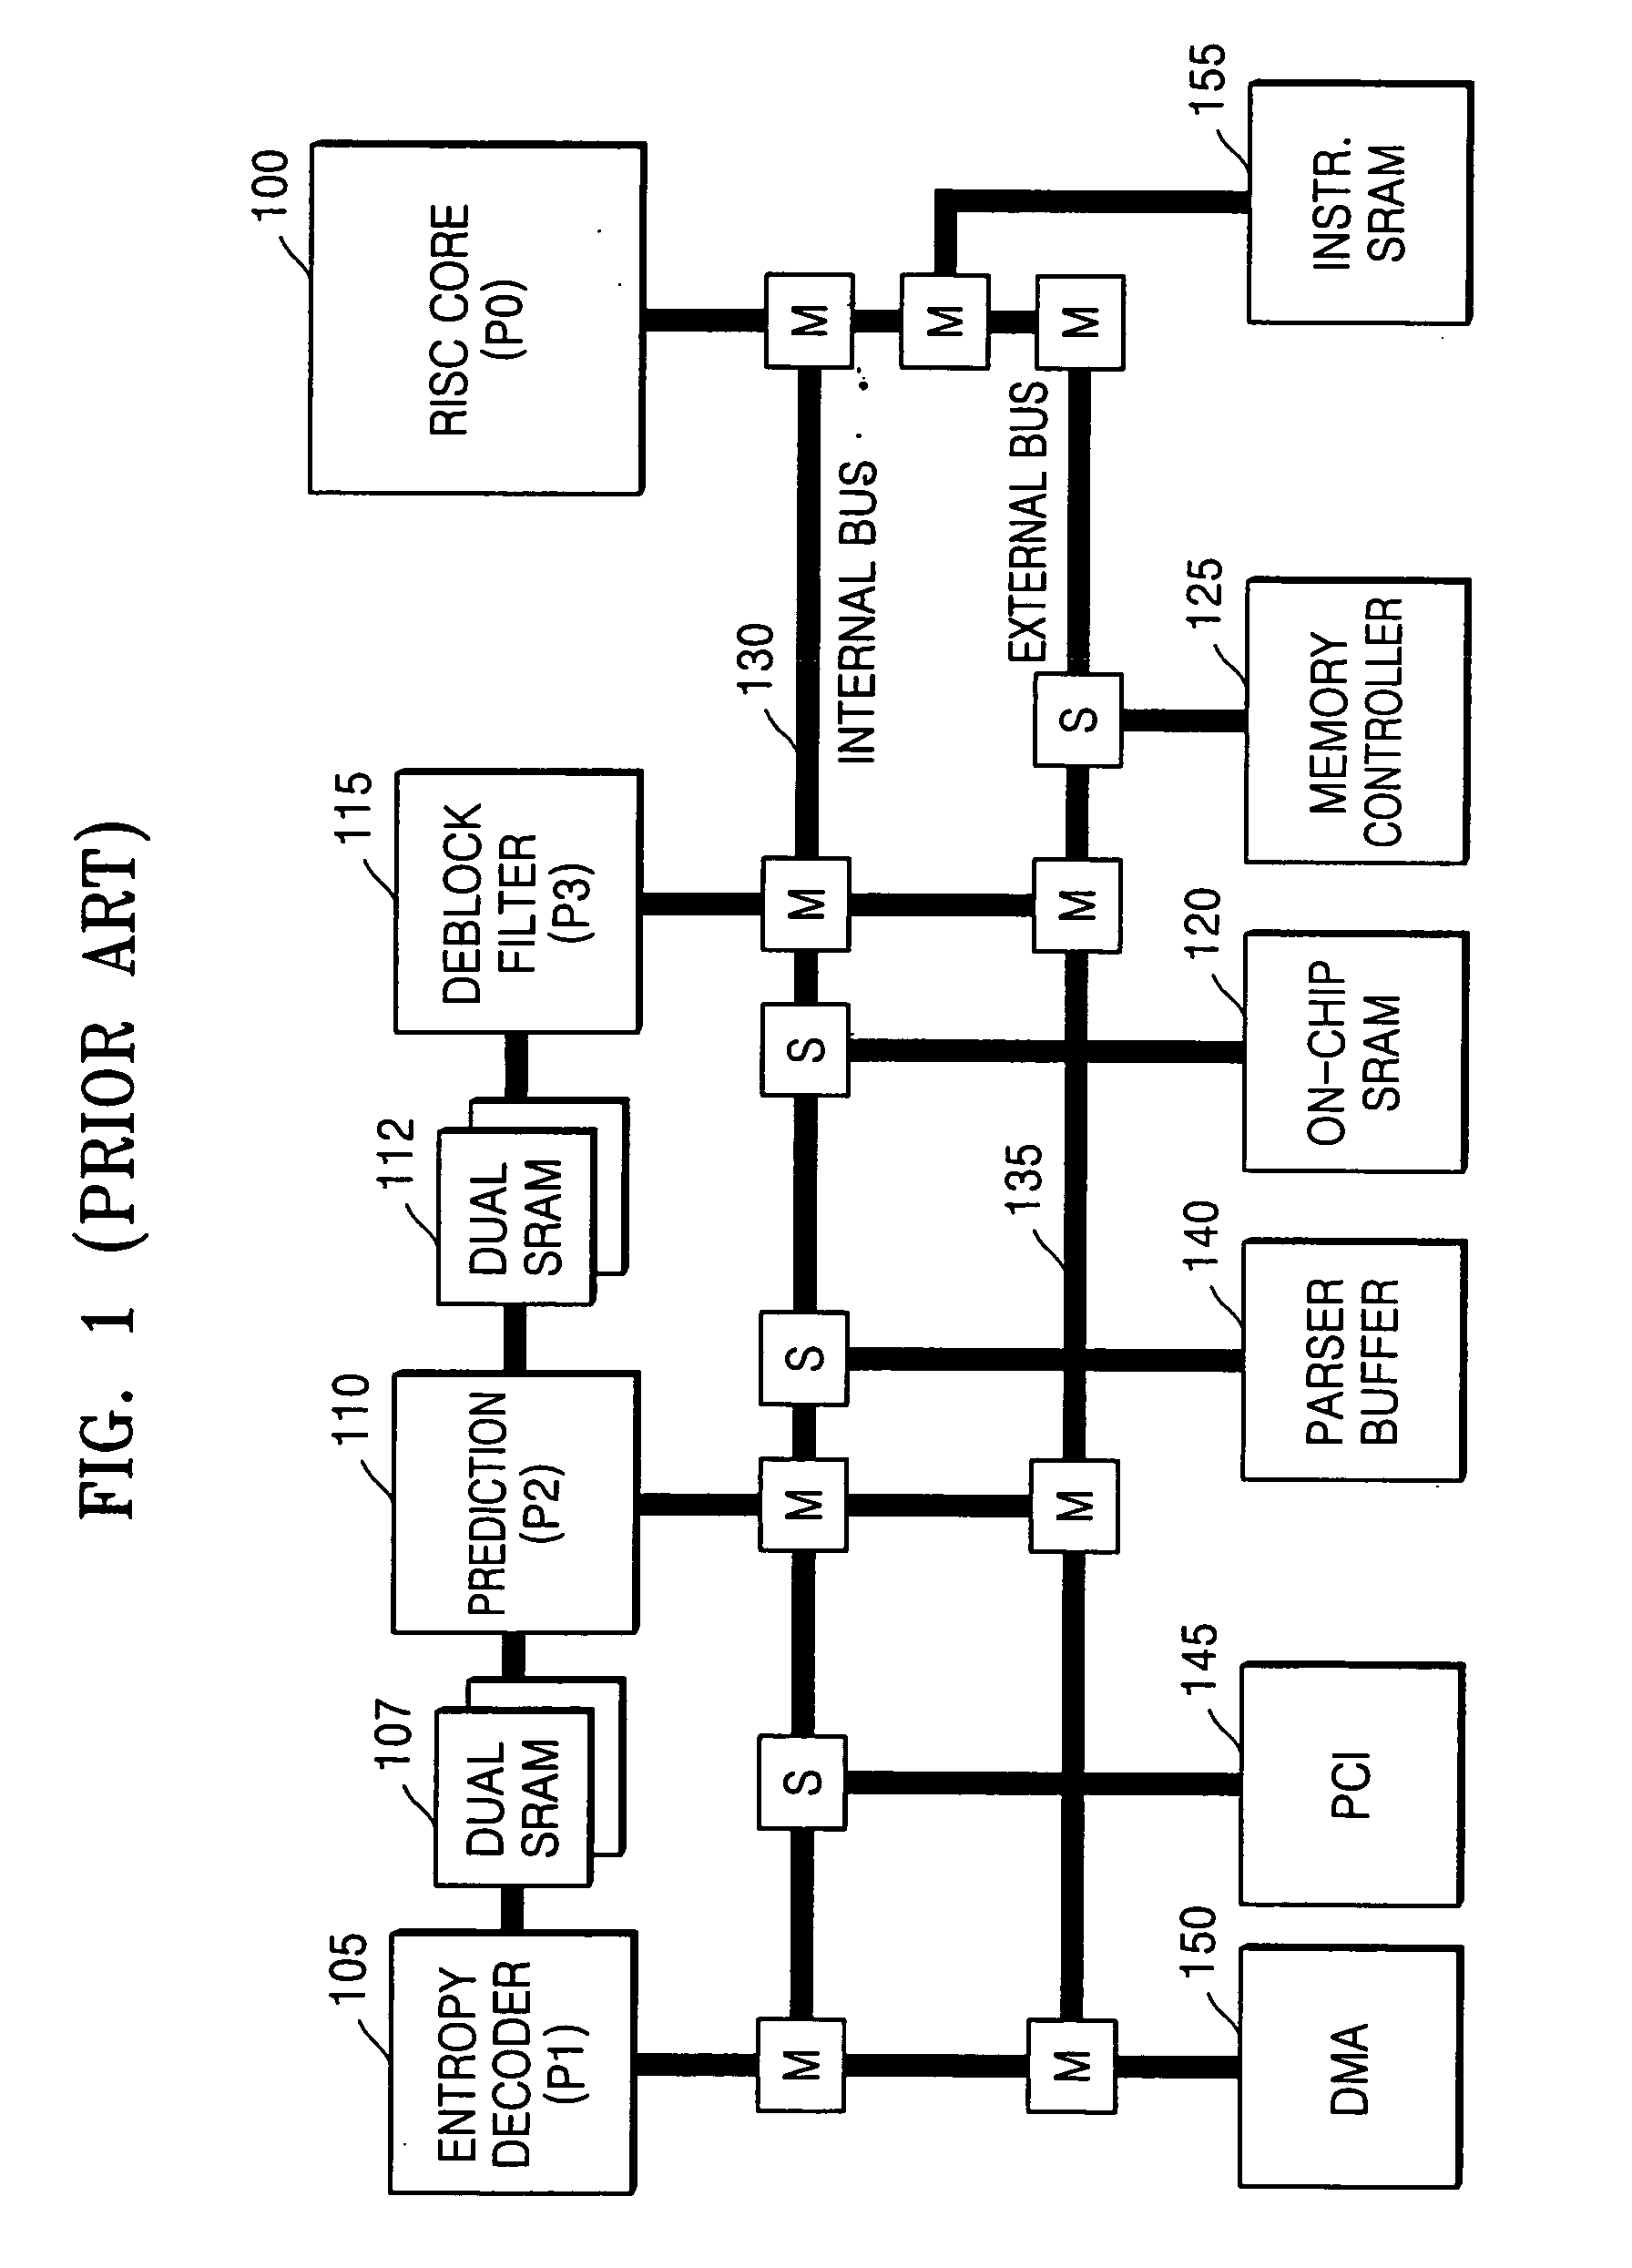 Memory mapping apparatus and method for video decoder/encoder